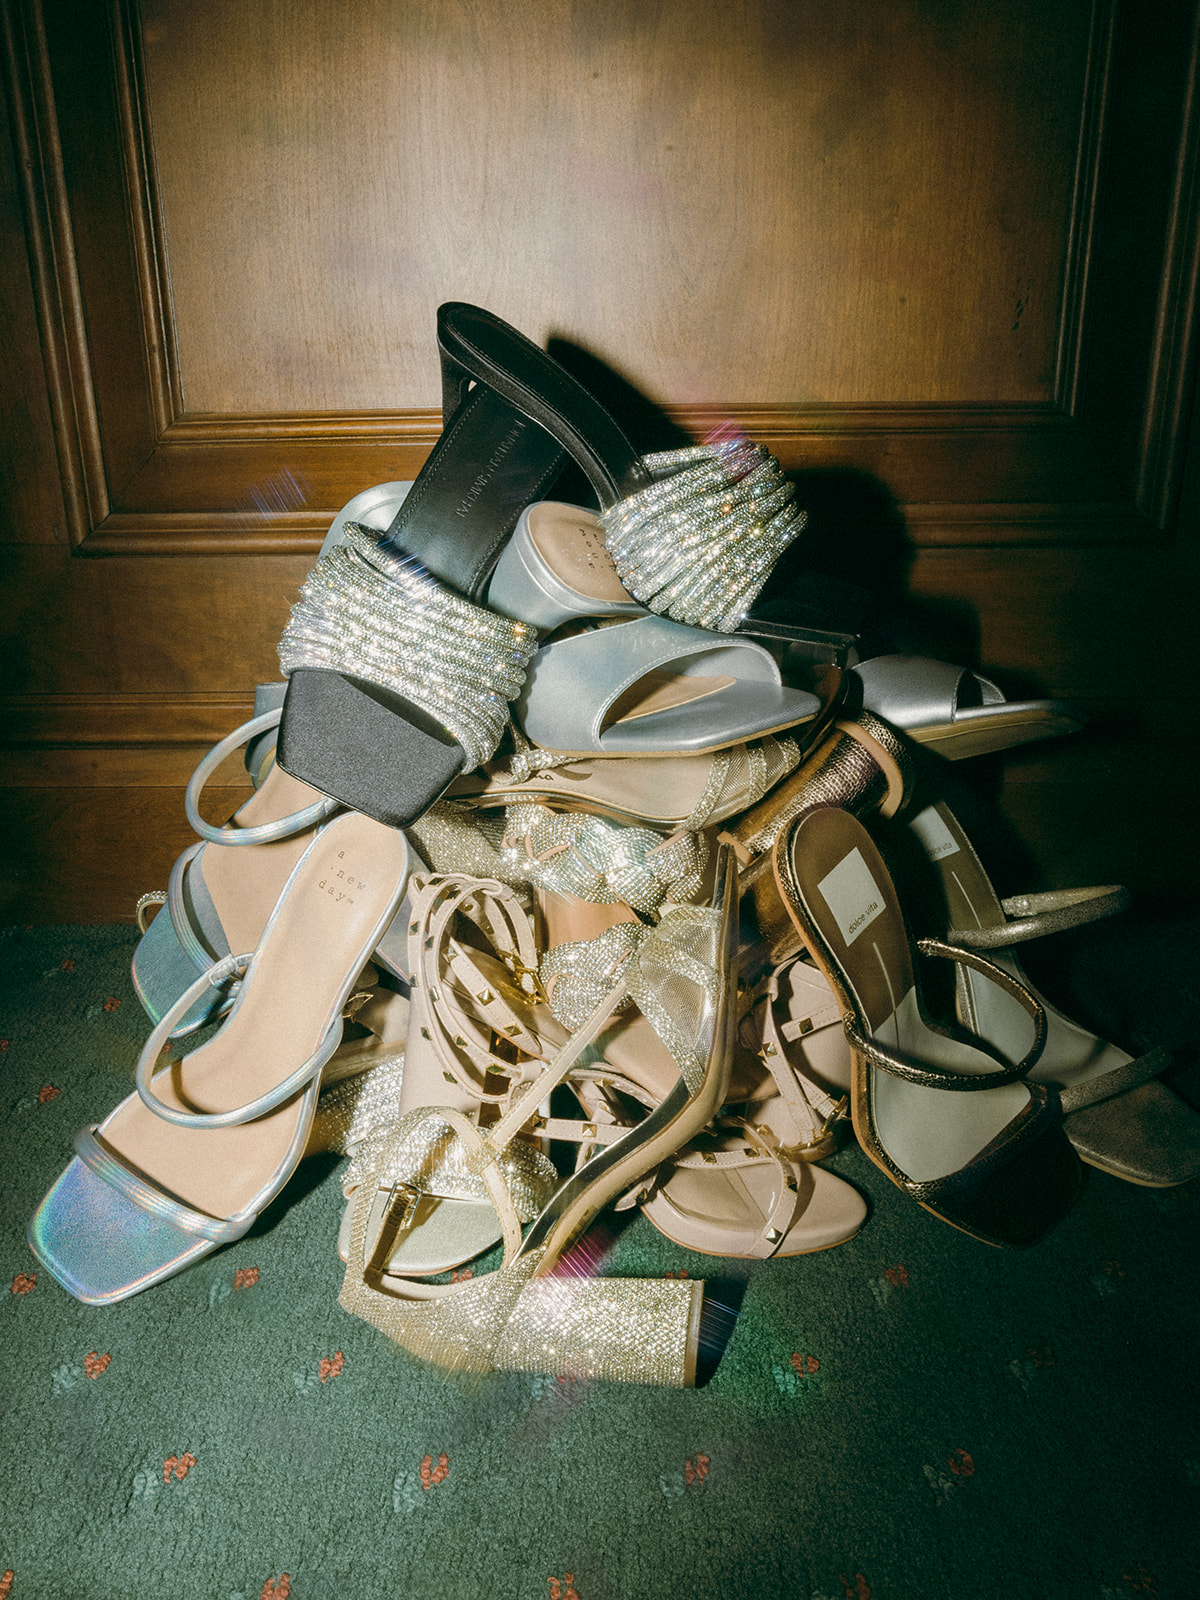 A stack of bridal party shoes with the bride's Jonathan Simkhai sandals on top.